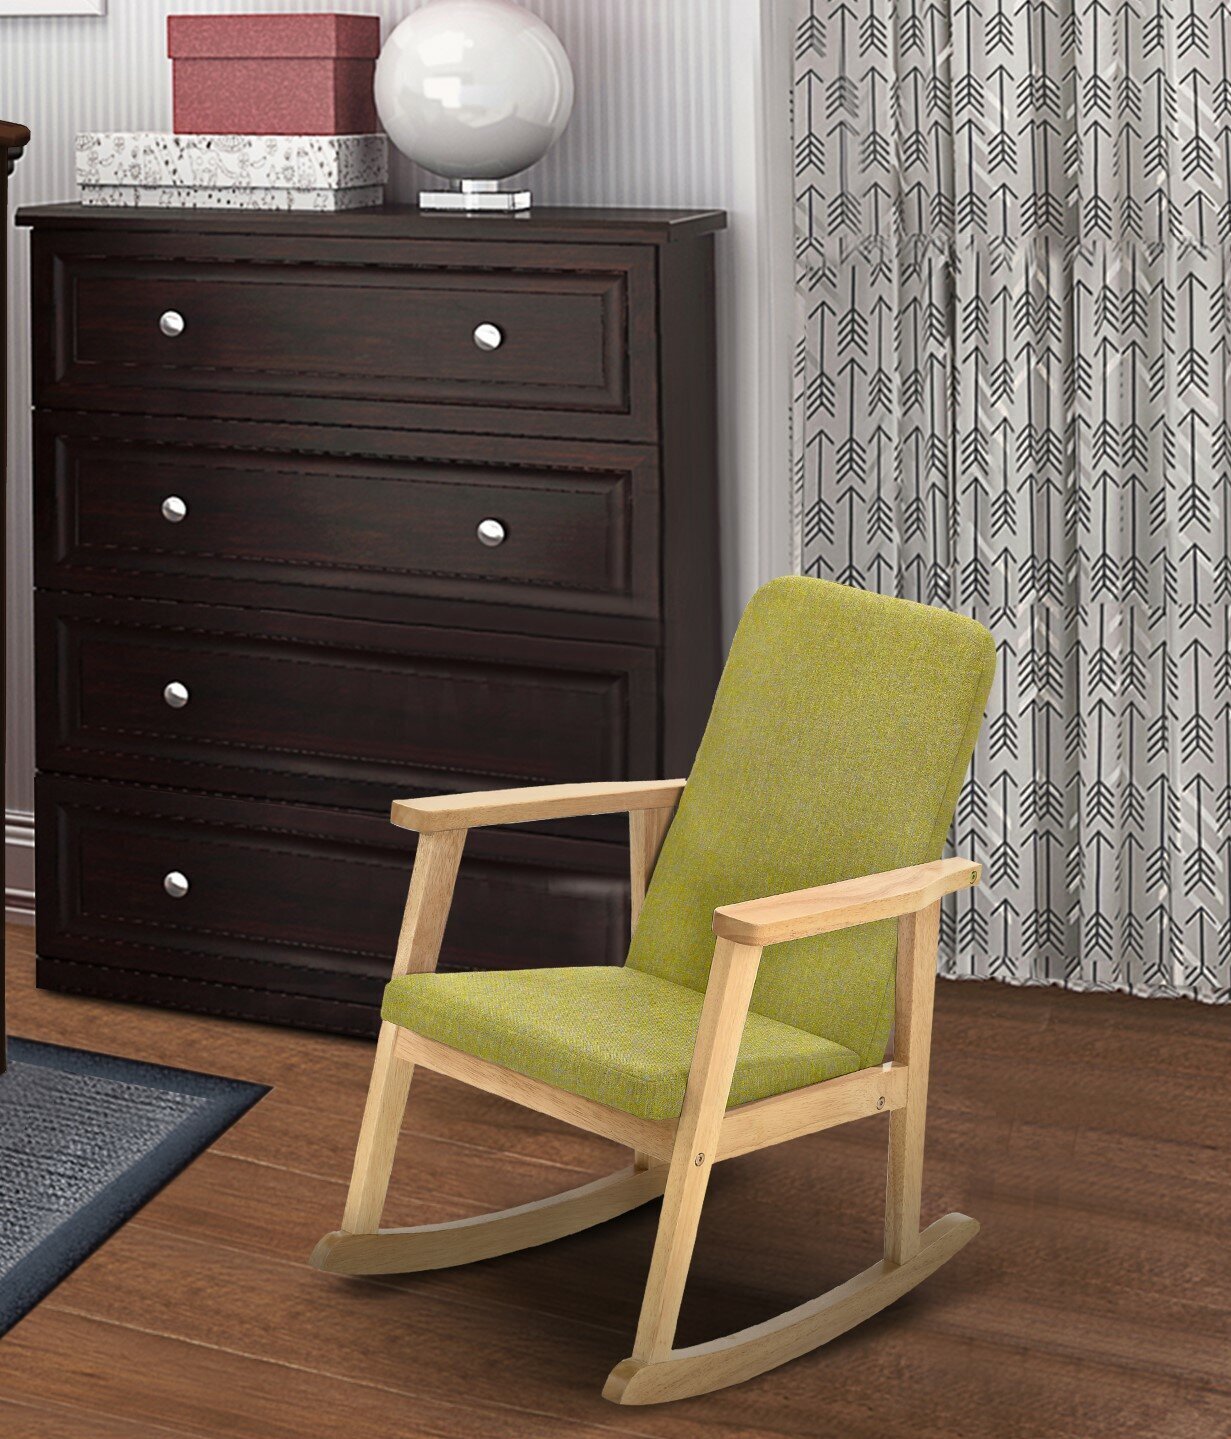 Upholstered and Wood Rocking Chair for Kids